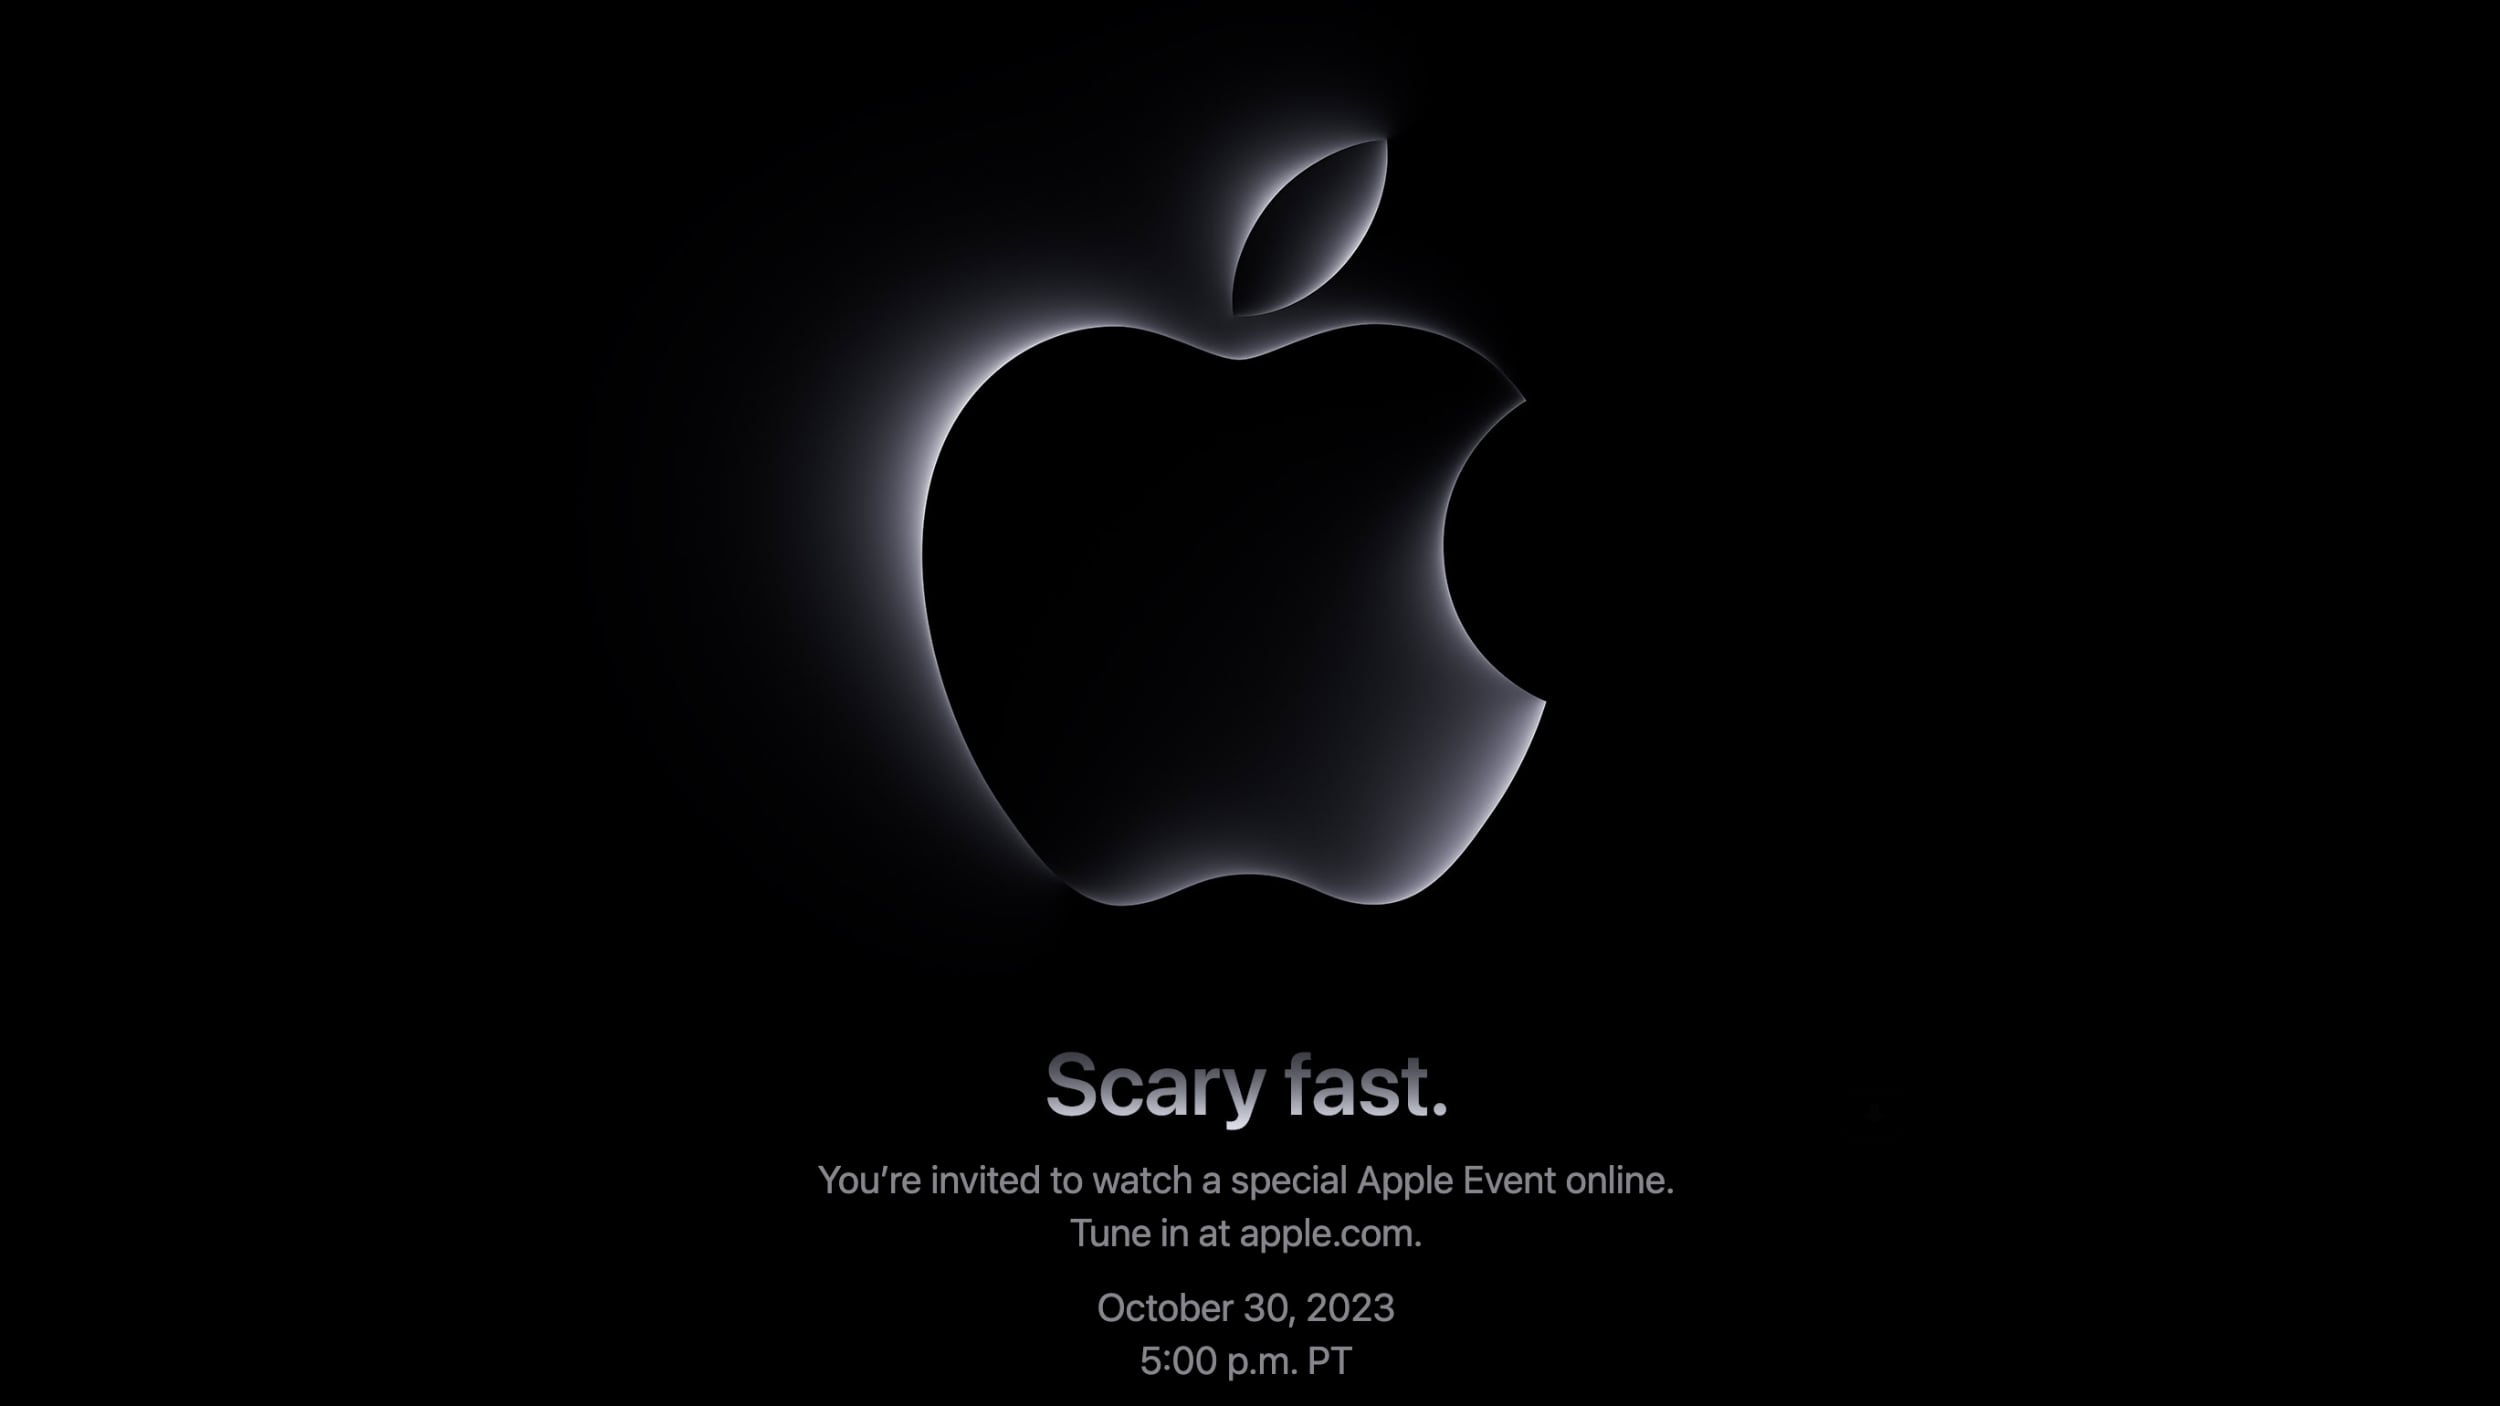 apple-october-scary-fast-event.jpg